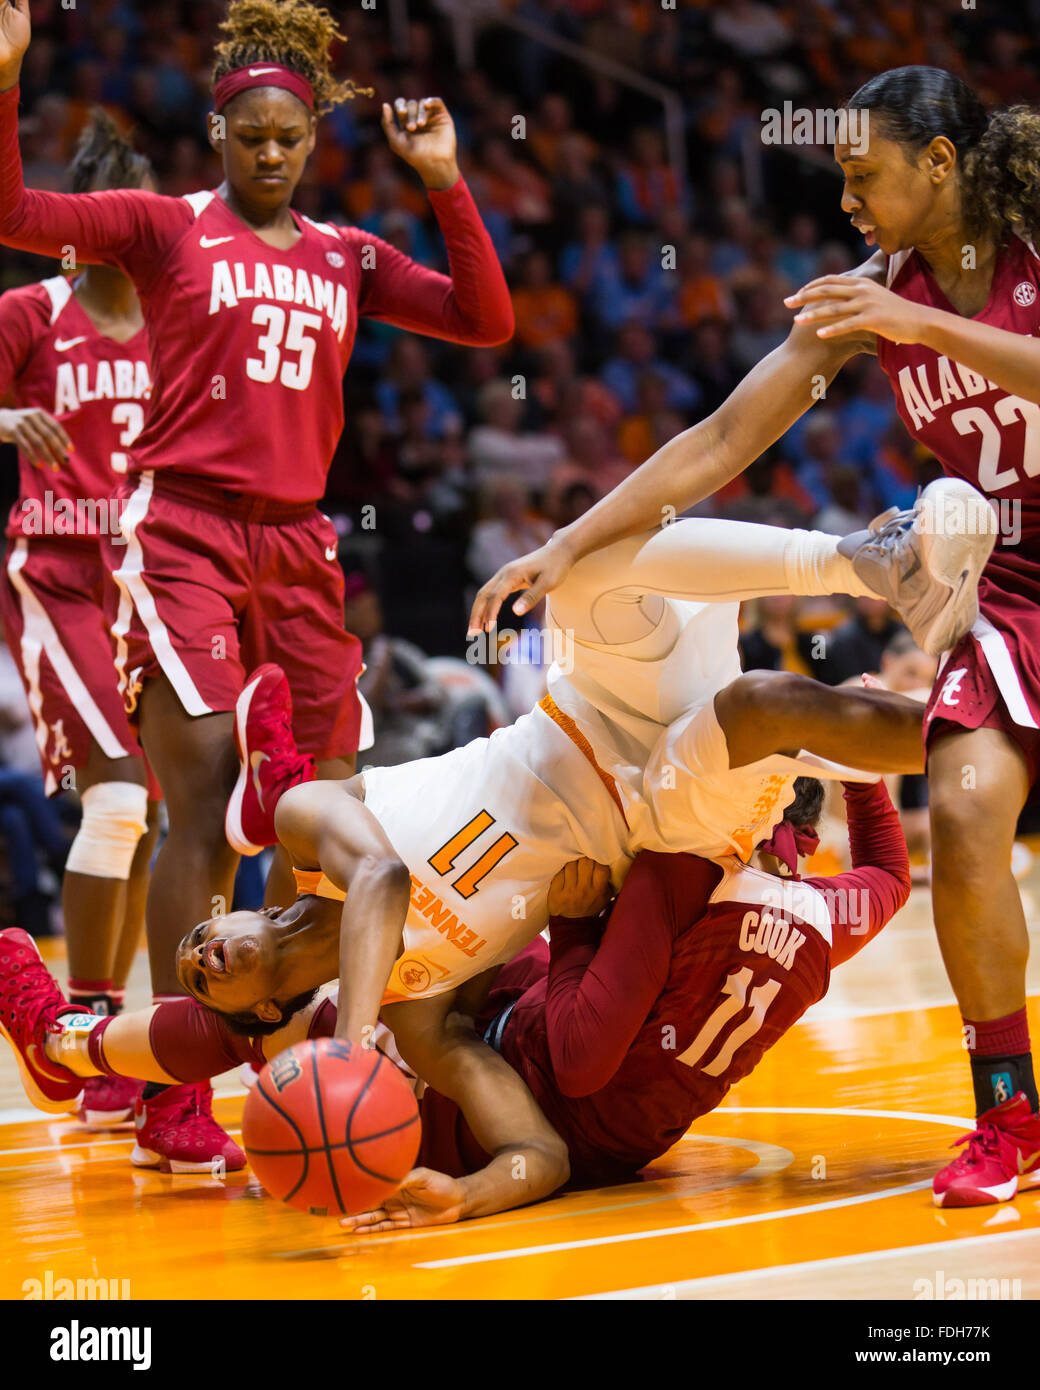 January 31, 2016: Diamond DeShields #11 of the Tennessee Lady Volunteers tumbles over Hannah Cook #11 of the Alabama Crimson Tide while going for a rebound during the NCAA basketball game between the University of Tennessee Lady Volunteers and the University of Alabama Crimson Tide at Thompson Boling Arena in Knoxville TN Tim Gangloff/CSM Stock Photo